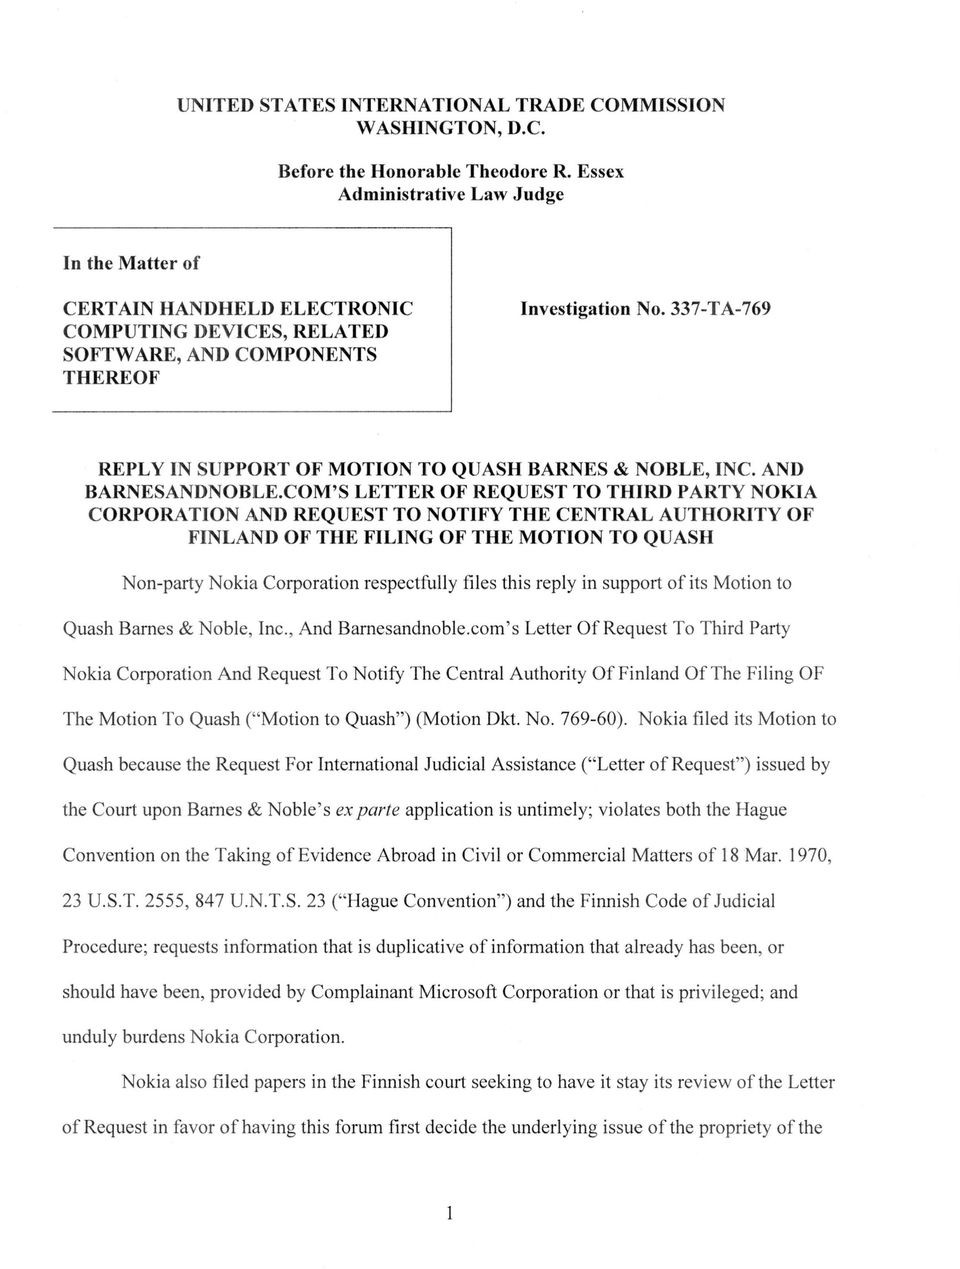 337-TA-769 REPLY IN SUPPORT OF MOTION TO QUASH BARNES & NOBLE, INC. AND BARNESANDNOBLE.